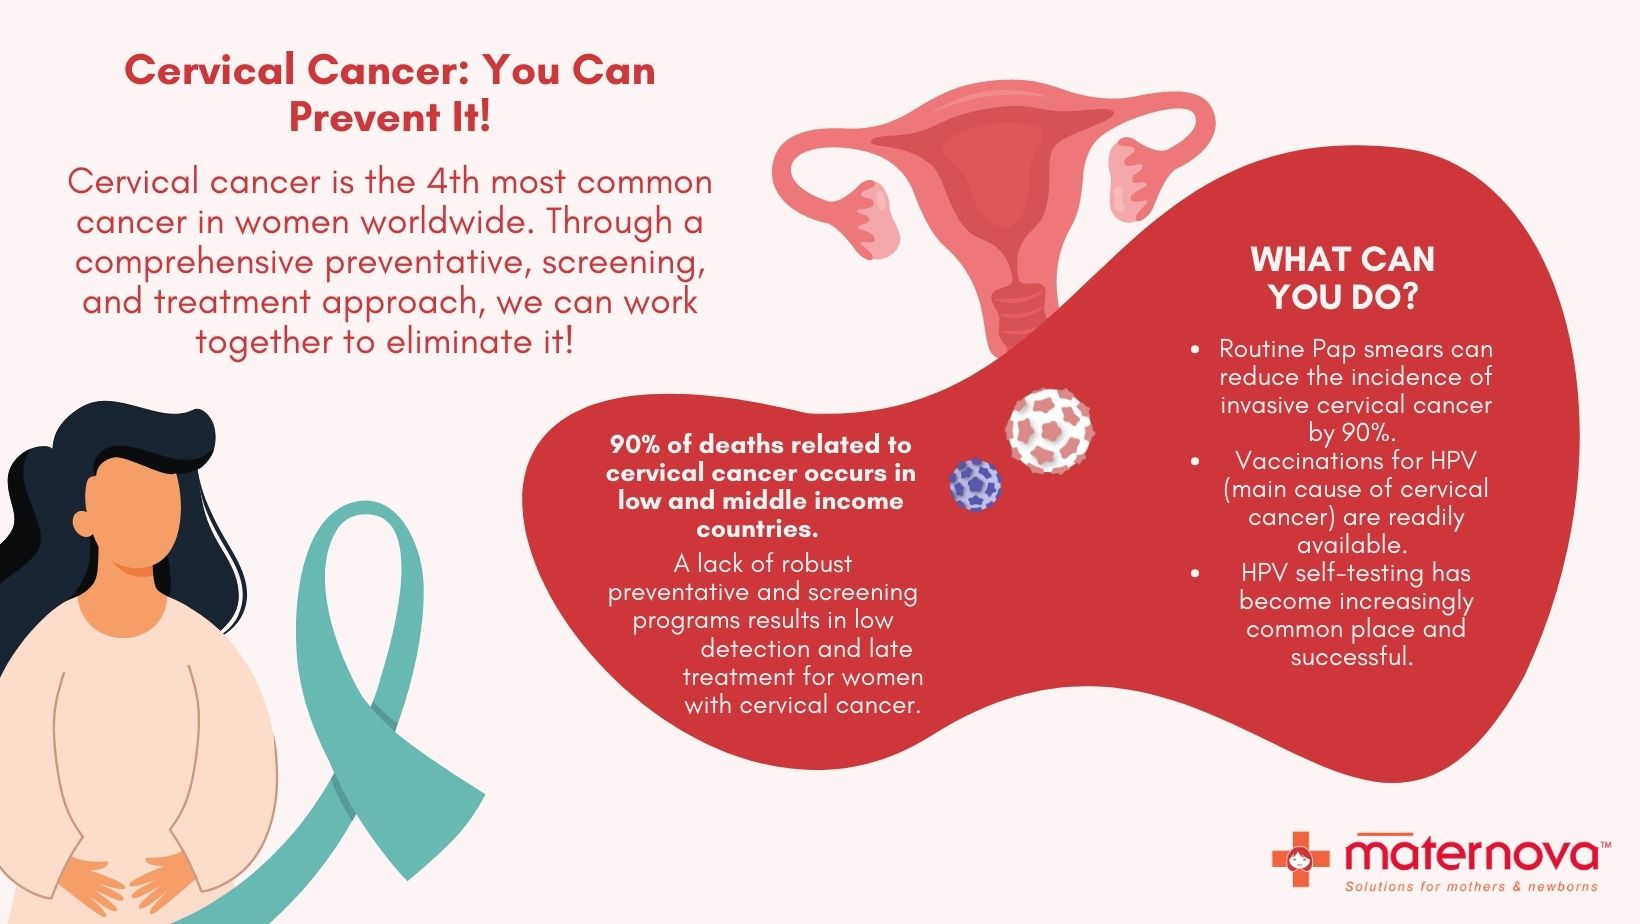 Cervical Cancer: You Can Prevent It!